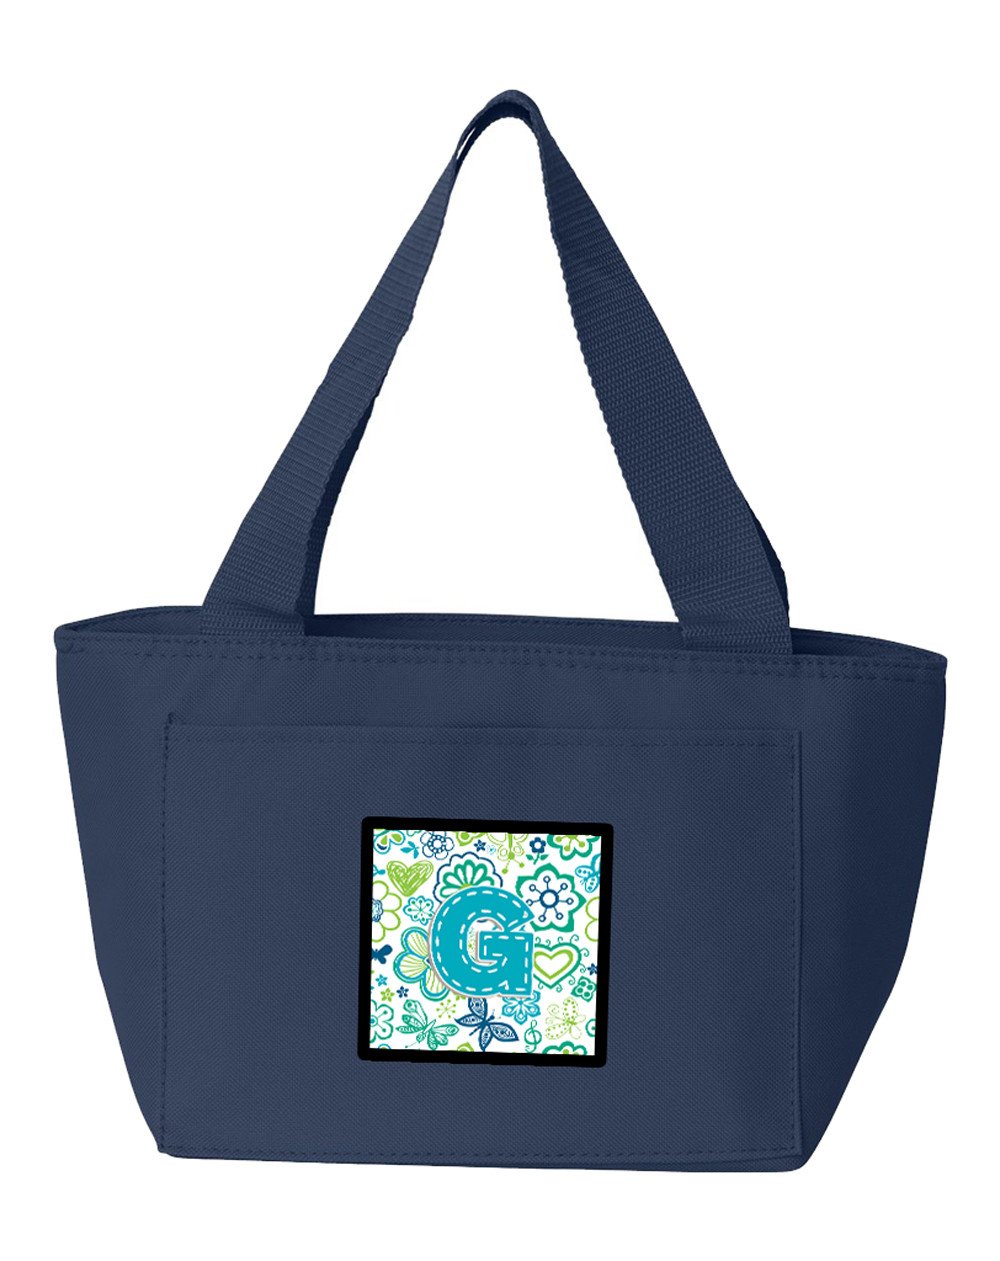 Letter G Flowers and Butterflies Teal Blue Lunch Bag CJ2006-GNA-8808 by Caroline's Treasures